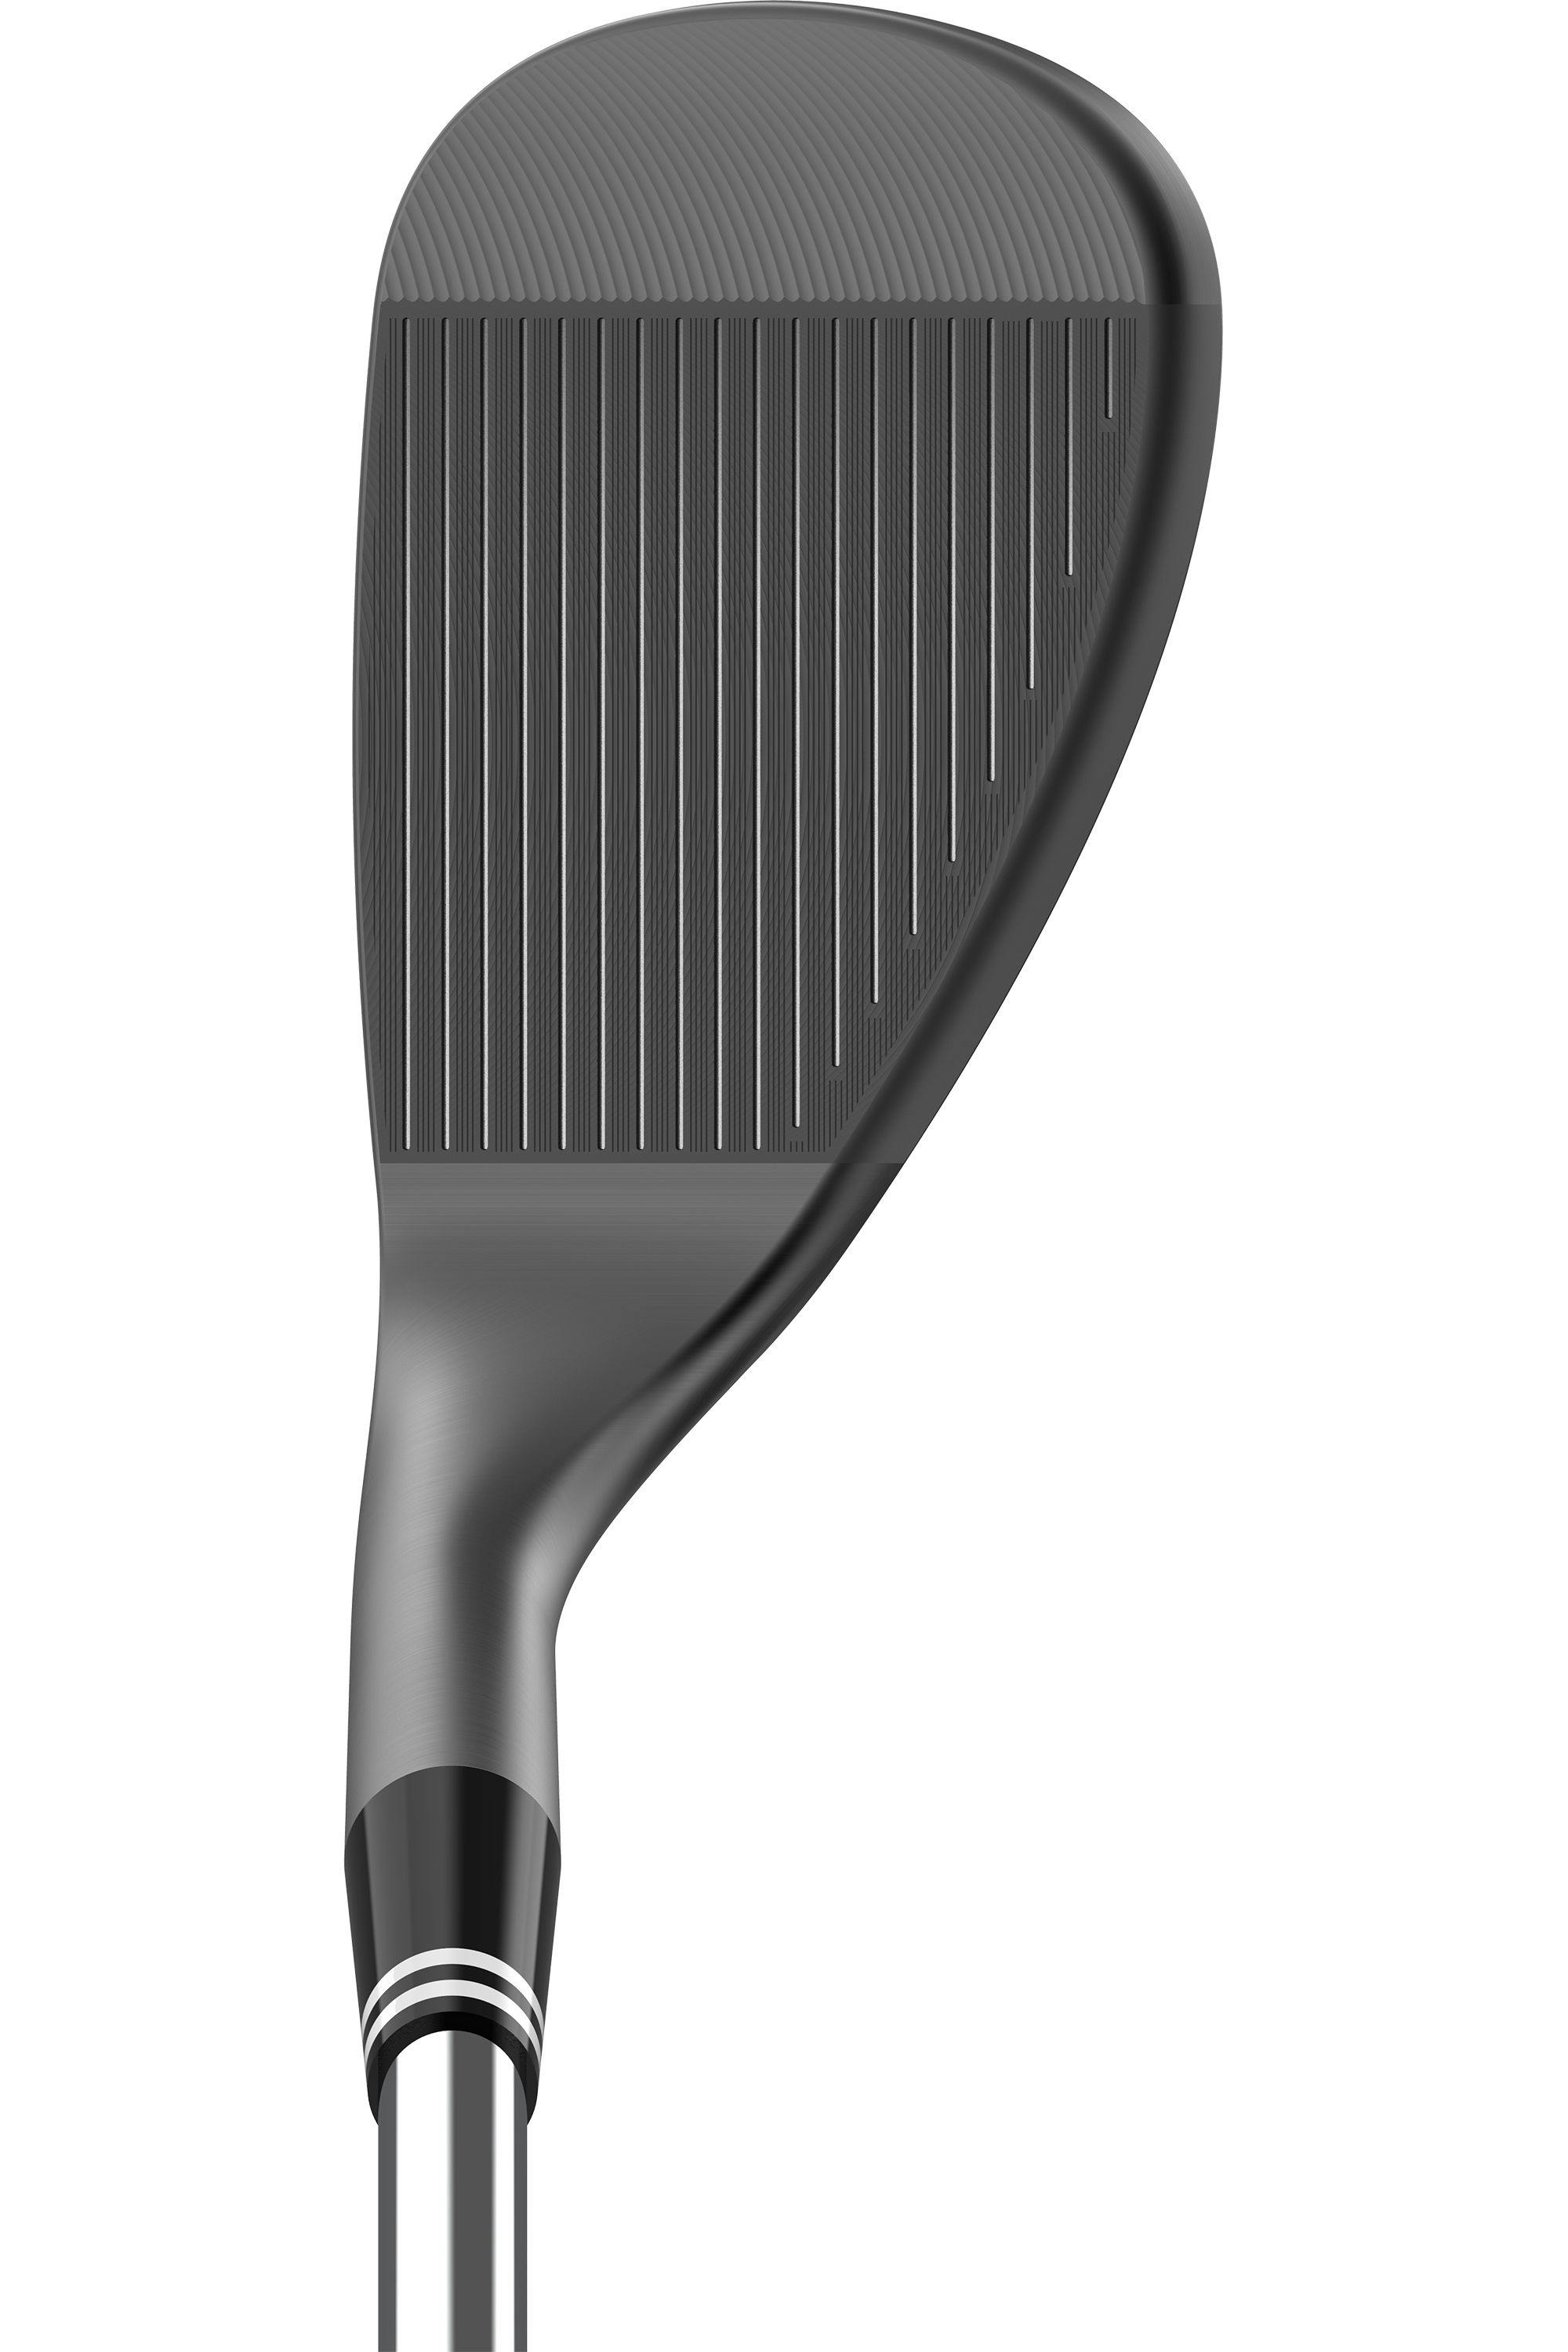 Cleveland RTX Zipcore Black Satin Wedge · Right handed · Steel · 60° · 10°